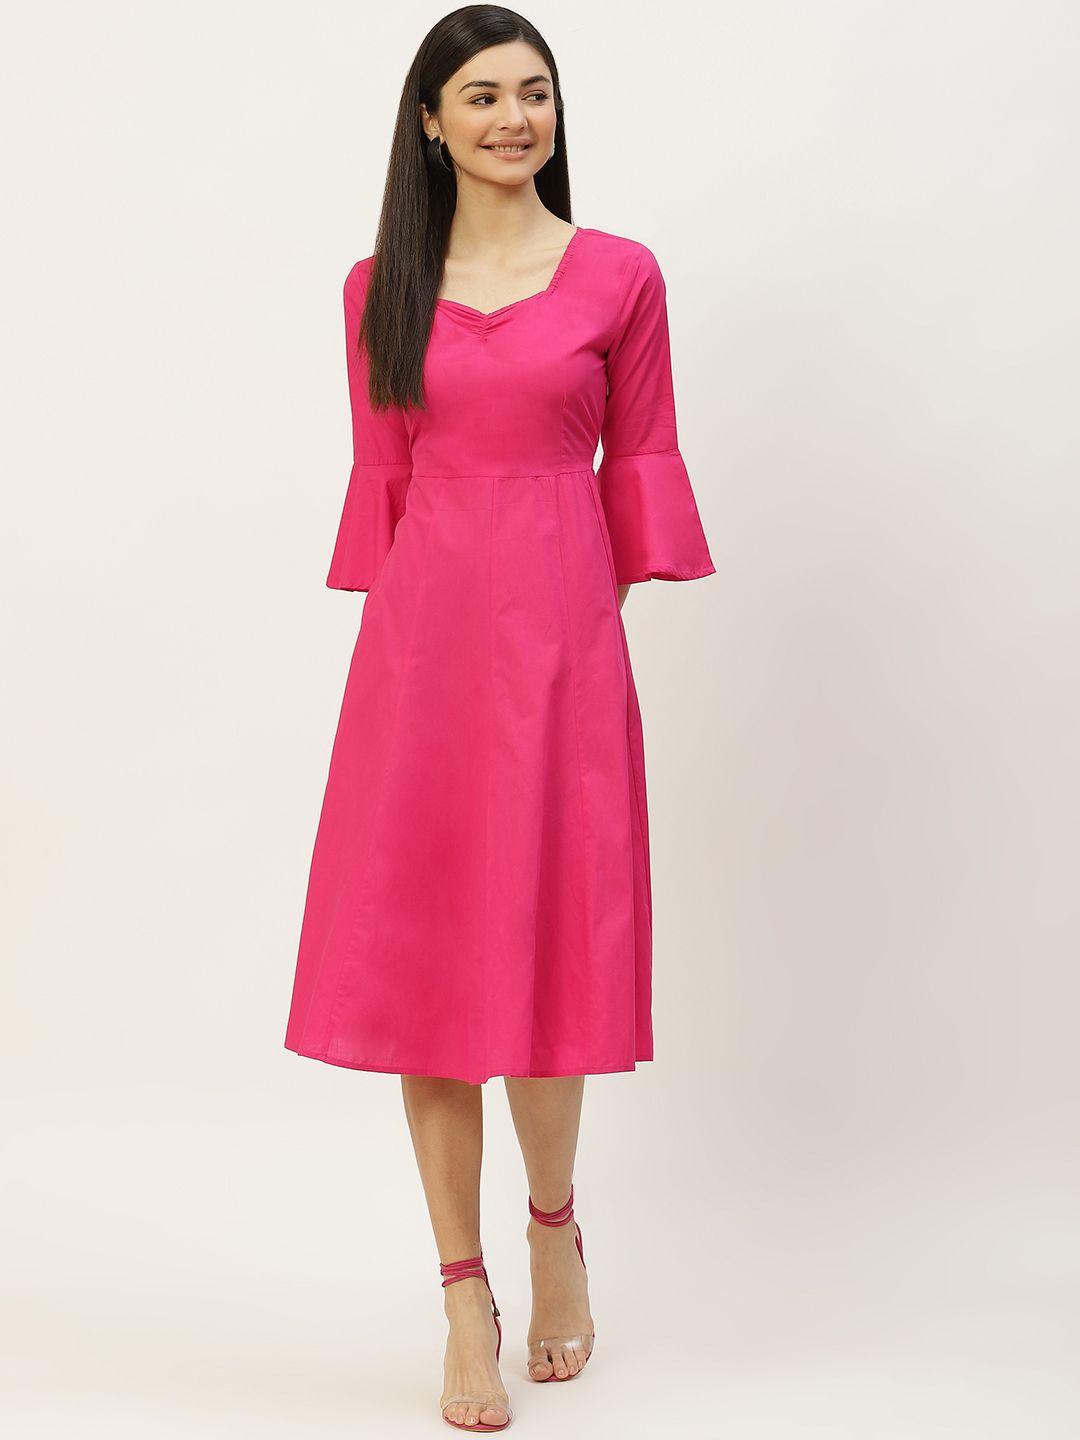 off label fuchsia solid a-line dress with bell sleeves